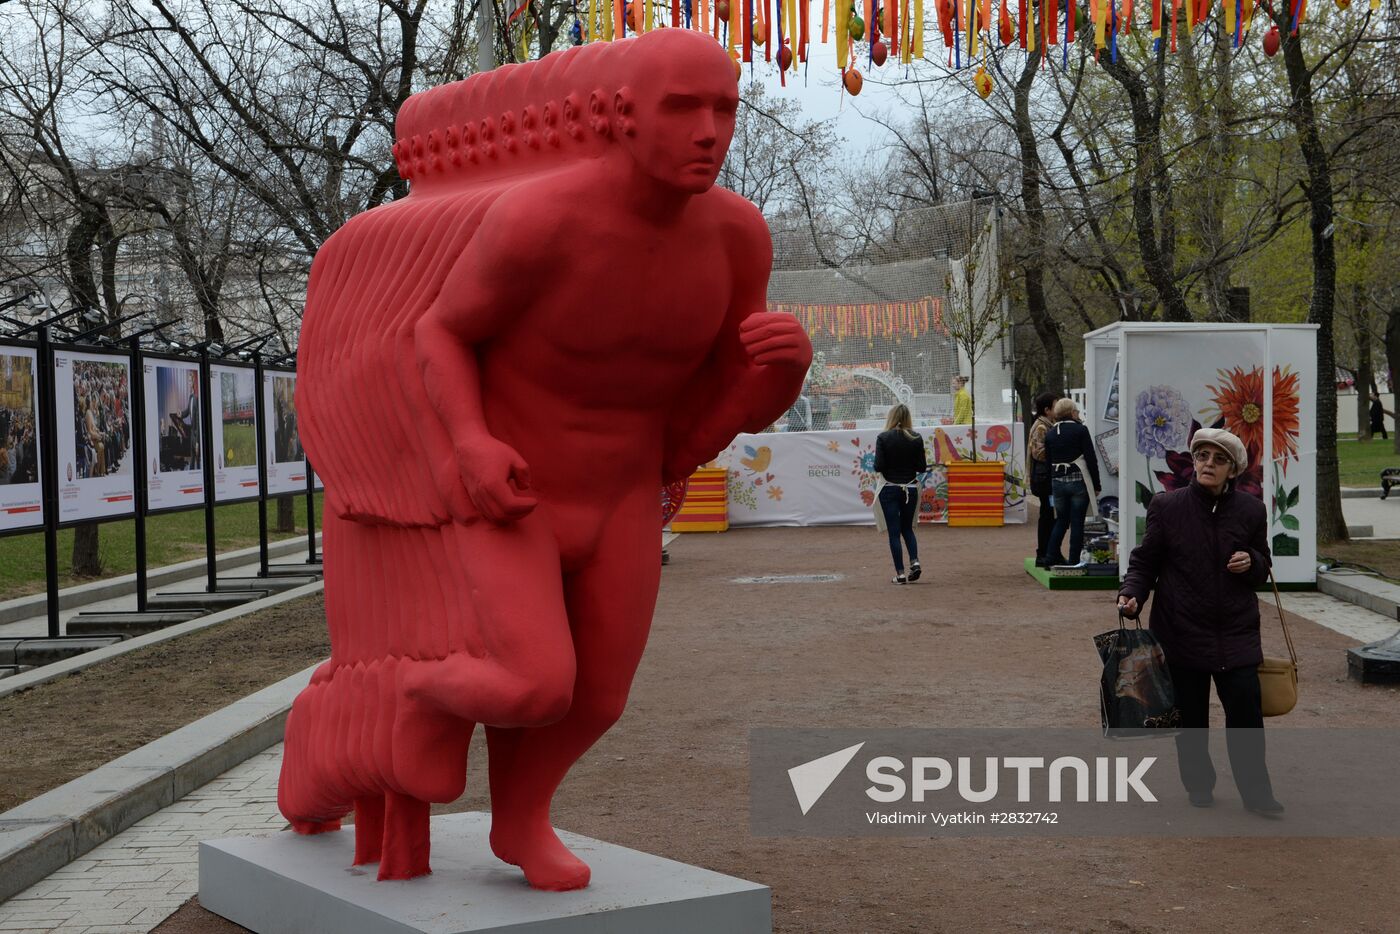 Moscow Spring festival opens